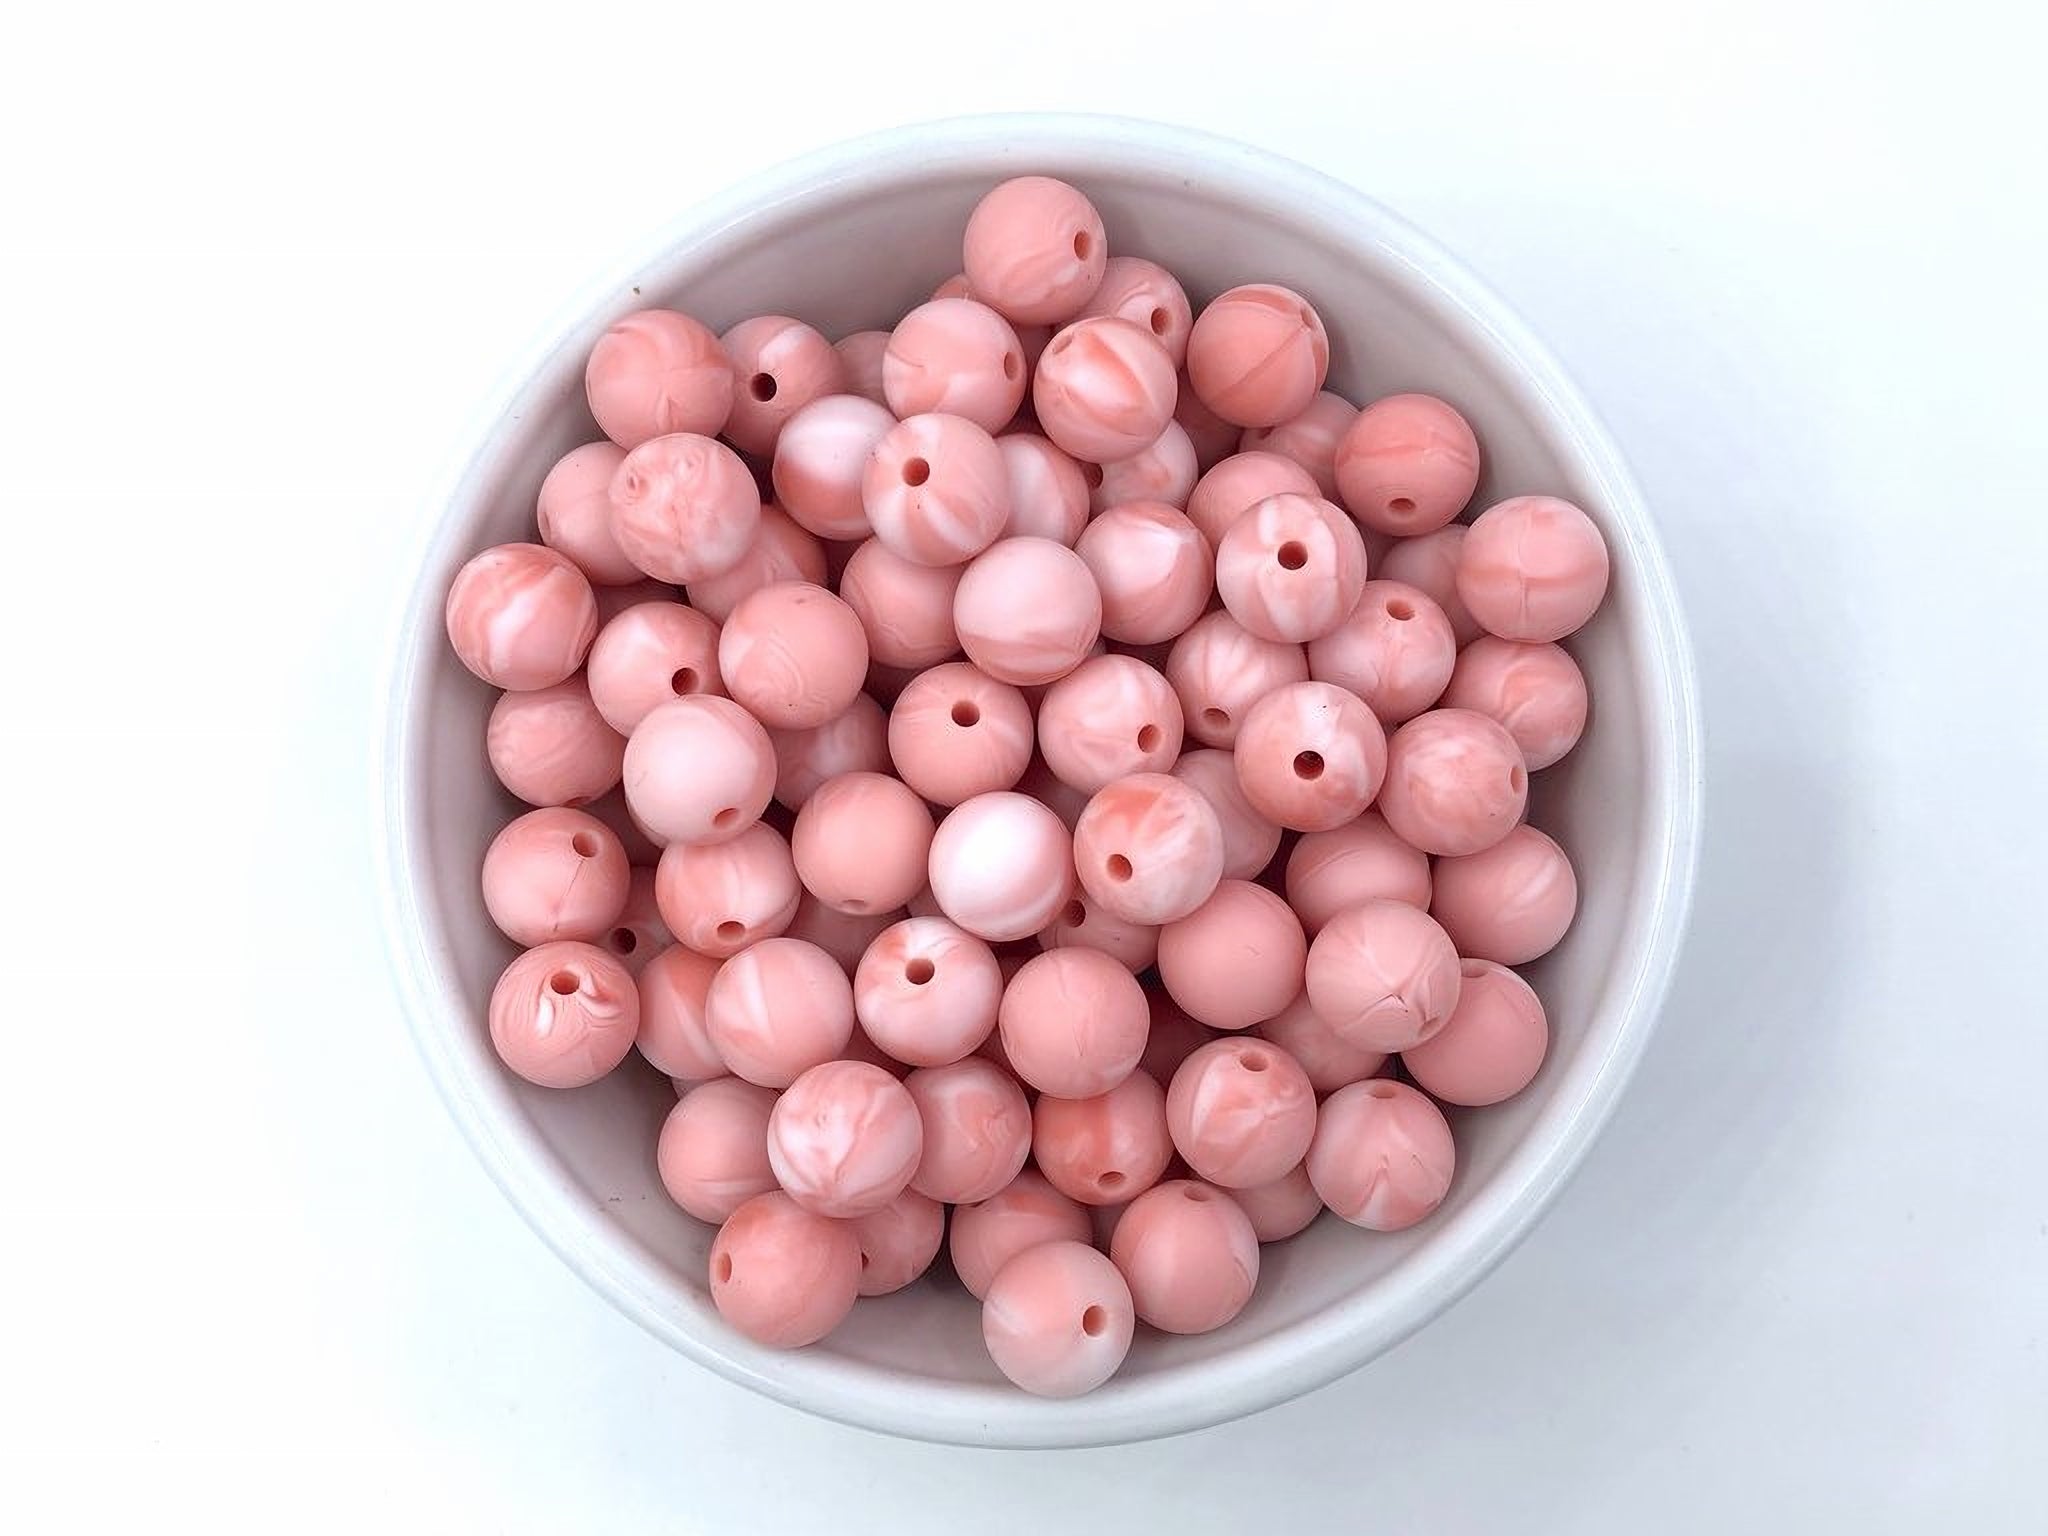 15mm Heart Beads Round Silicone Beads, Heart Silicone Beads